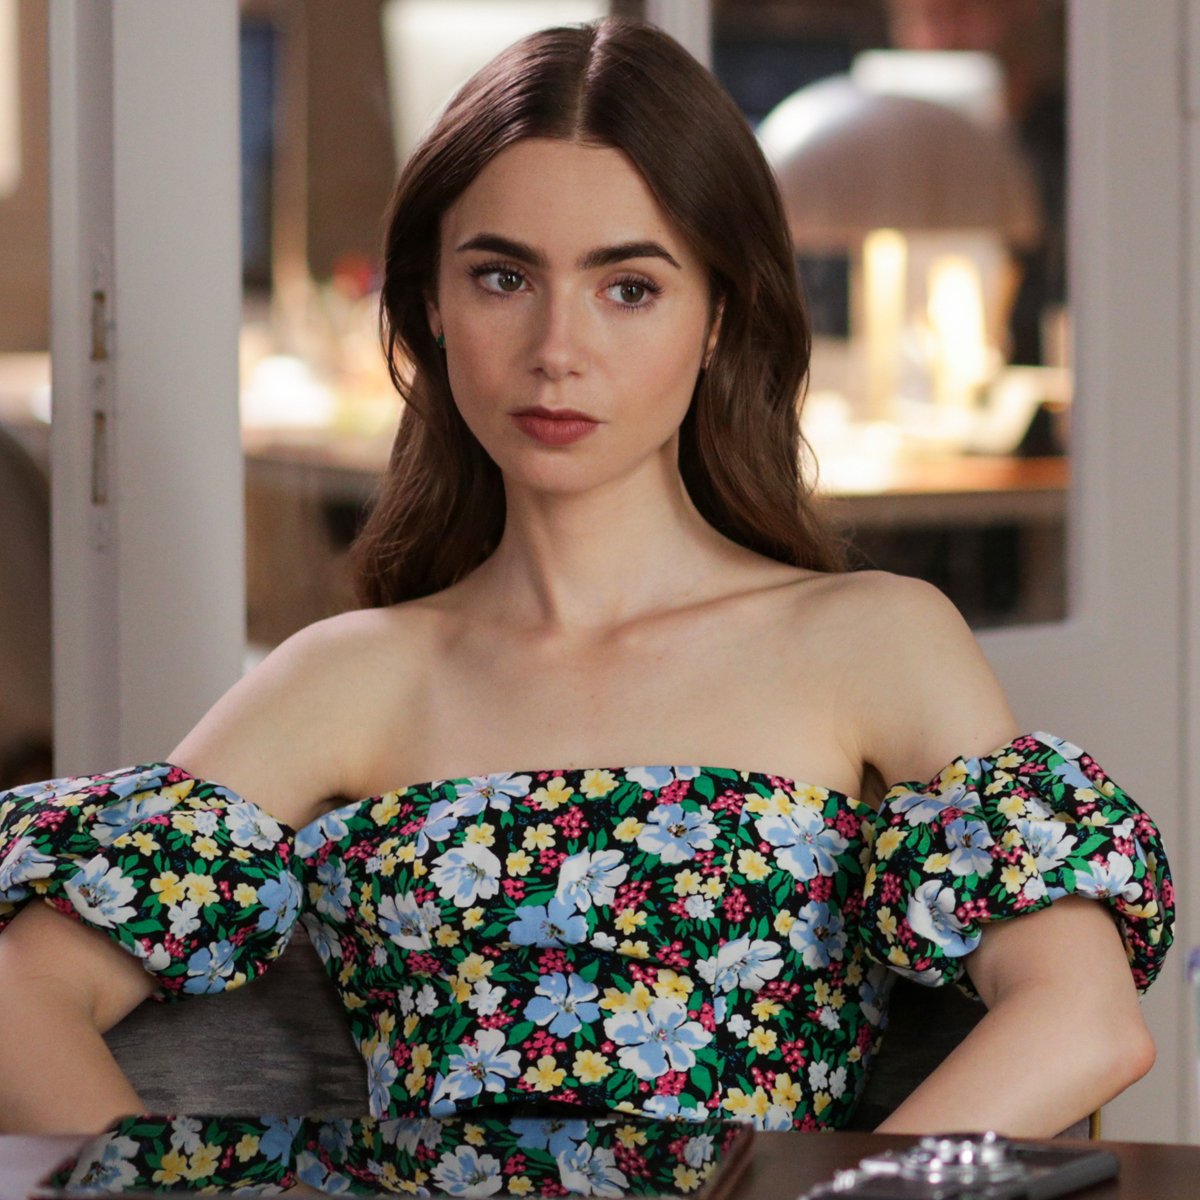 See Lily Collins' First 'Emily in Paris' Season 2 Outfits